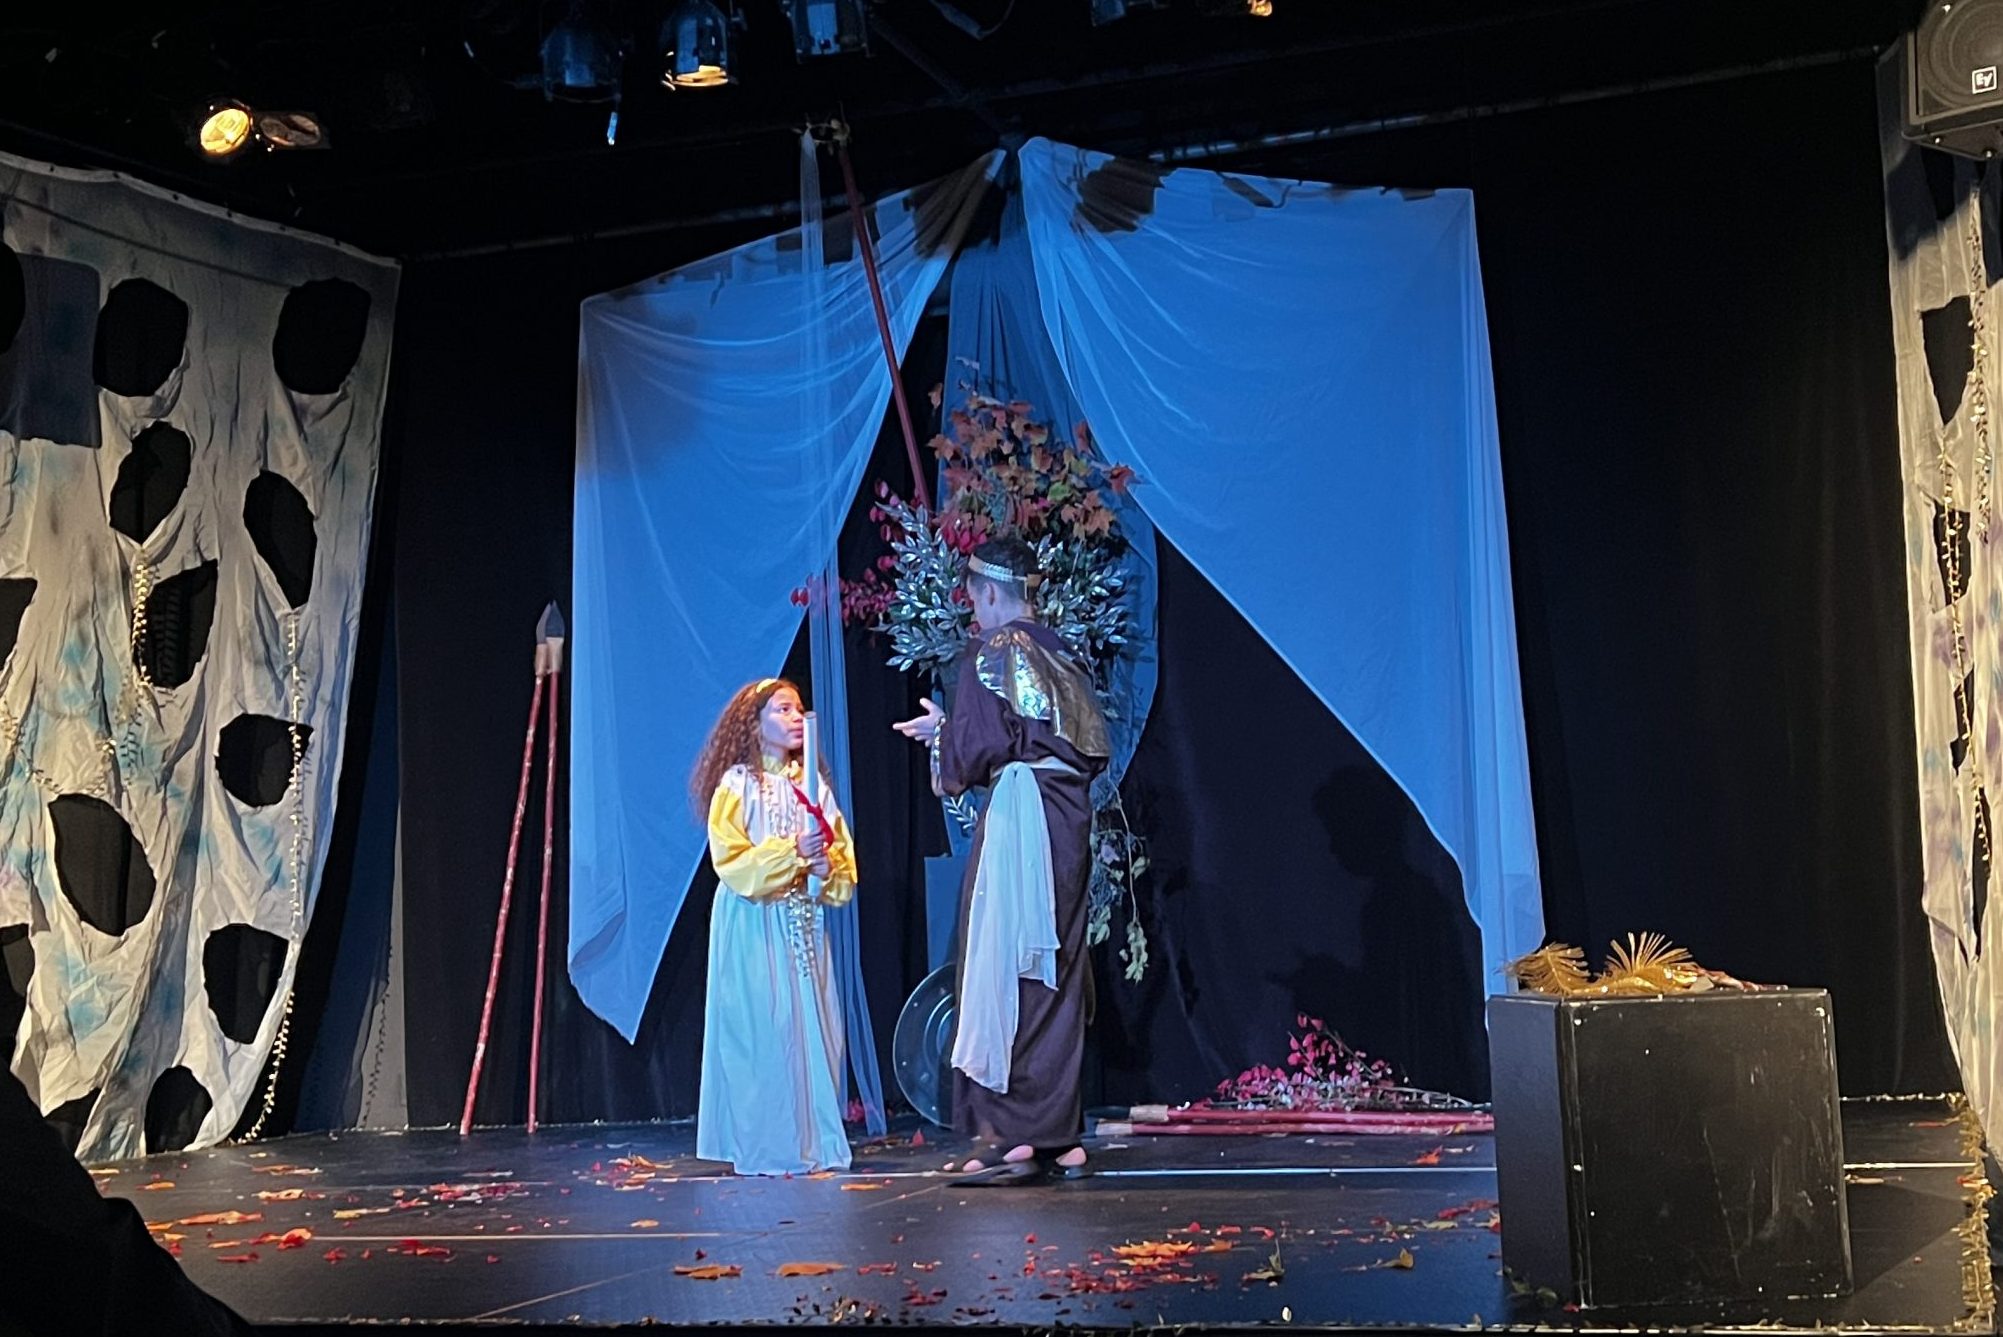 Emely Dominguez-Lambert and Michael Alberti stand on a decorate stage and act out a scene from a play